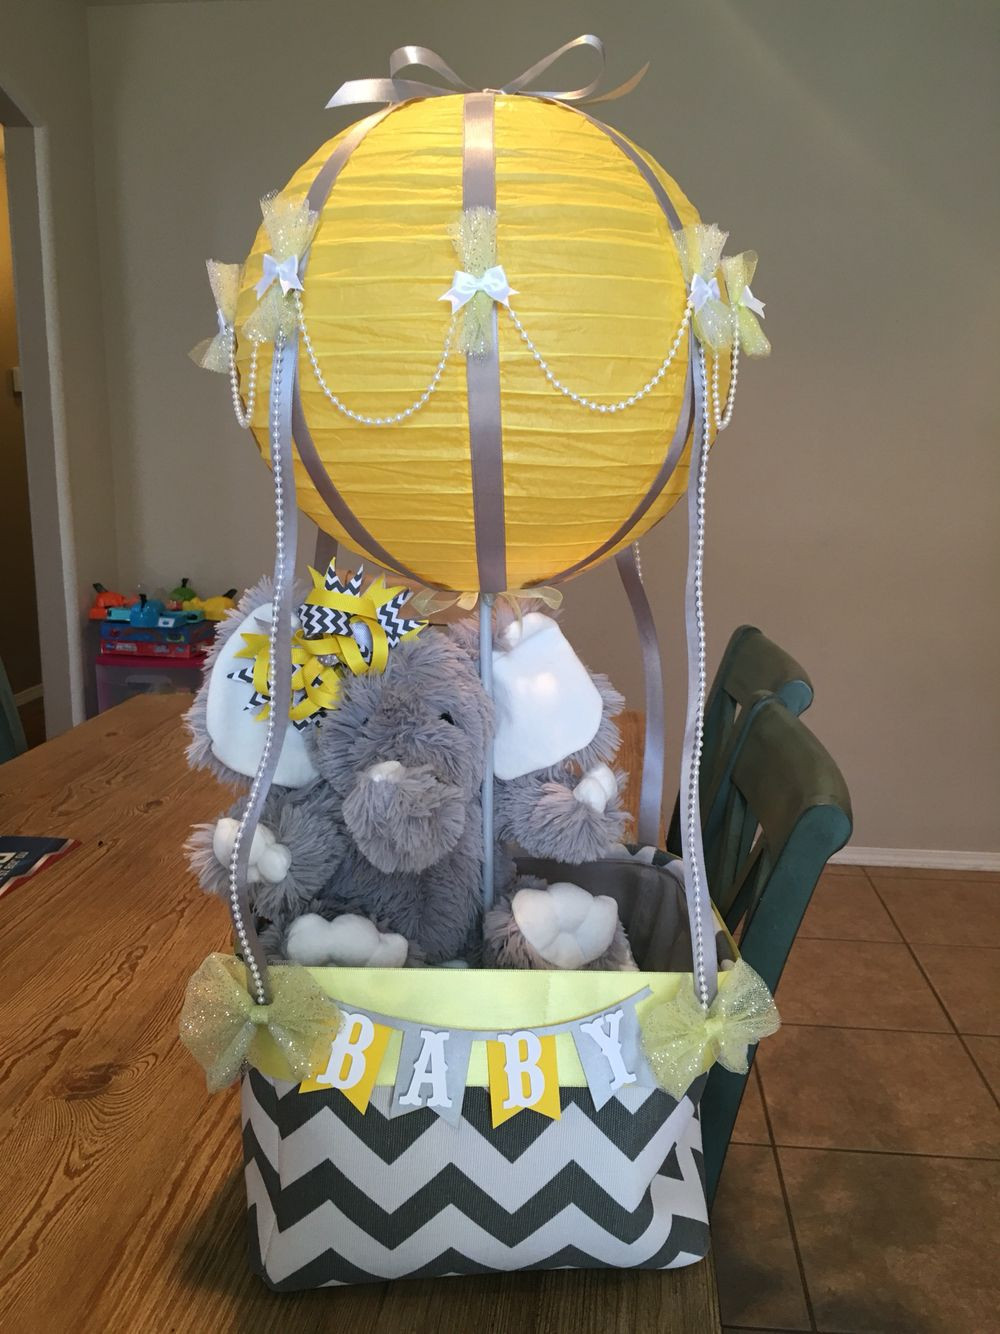 Elephant Baby Gift Ideas
 Gender neutral Baby shower hot air balloon Yellow grey